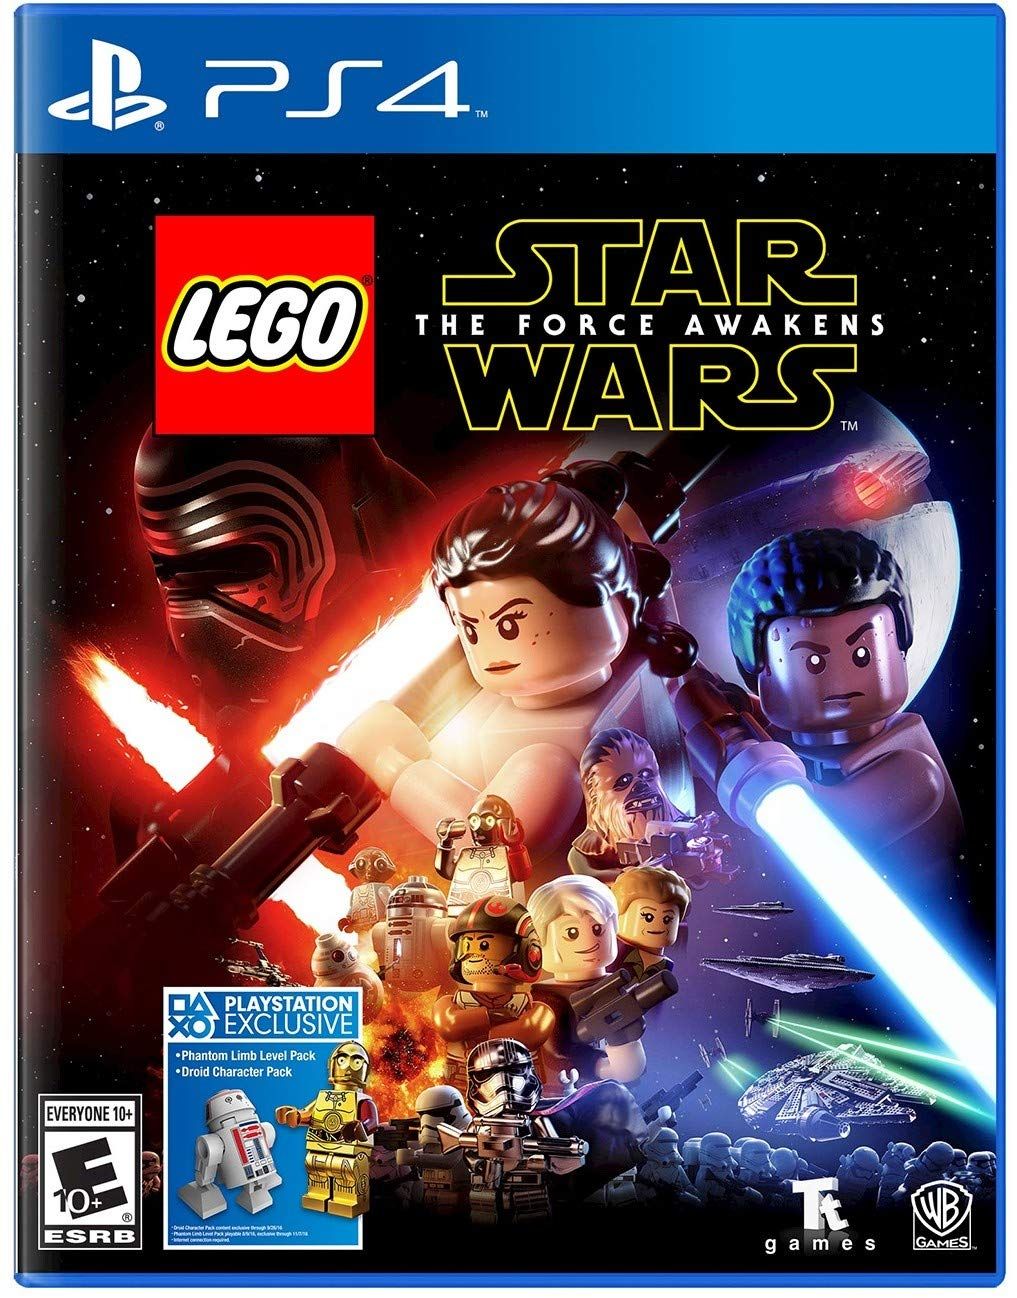 all star wars games on xbox